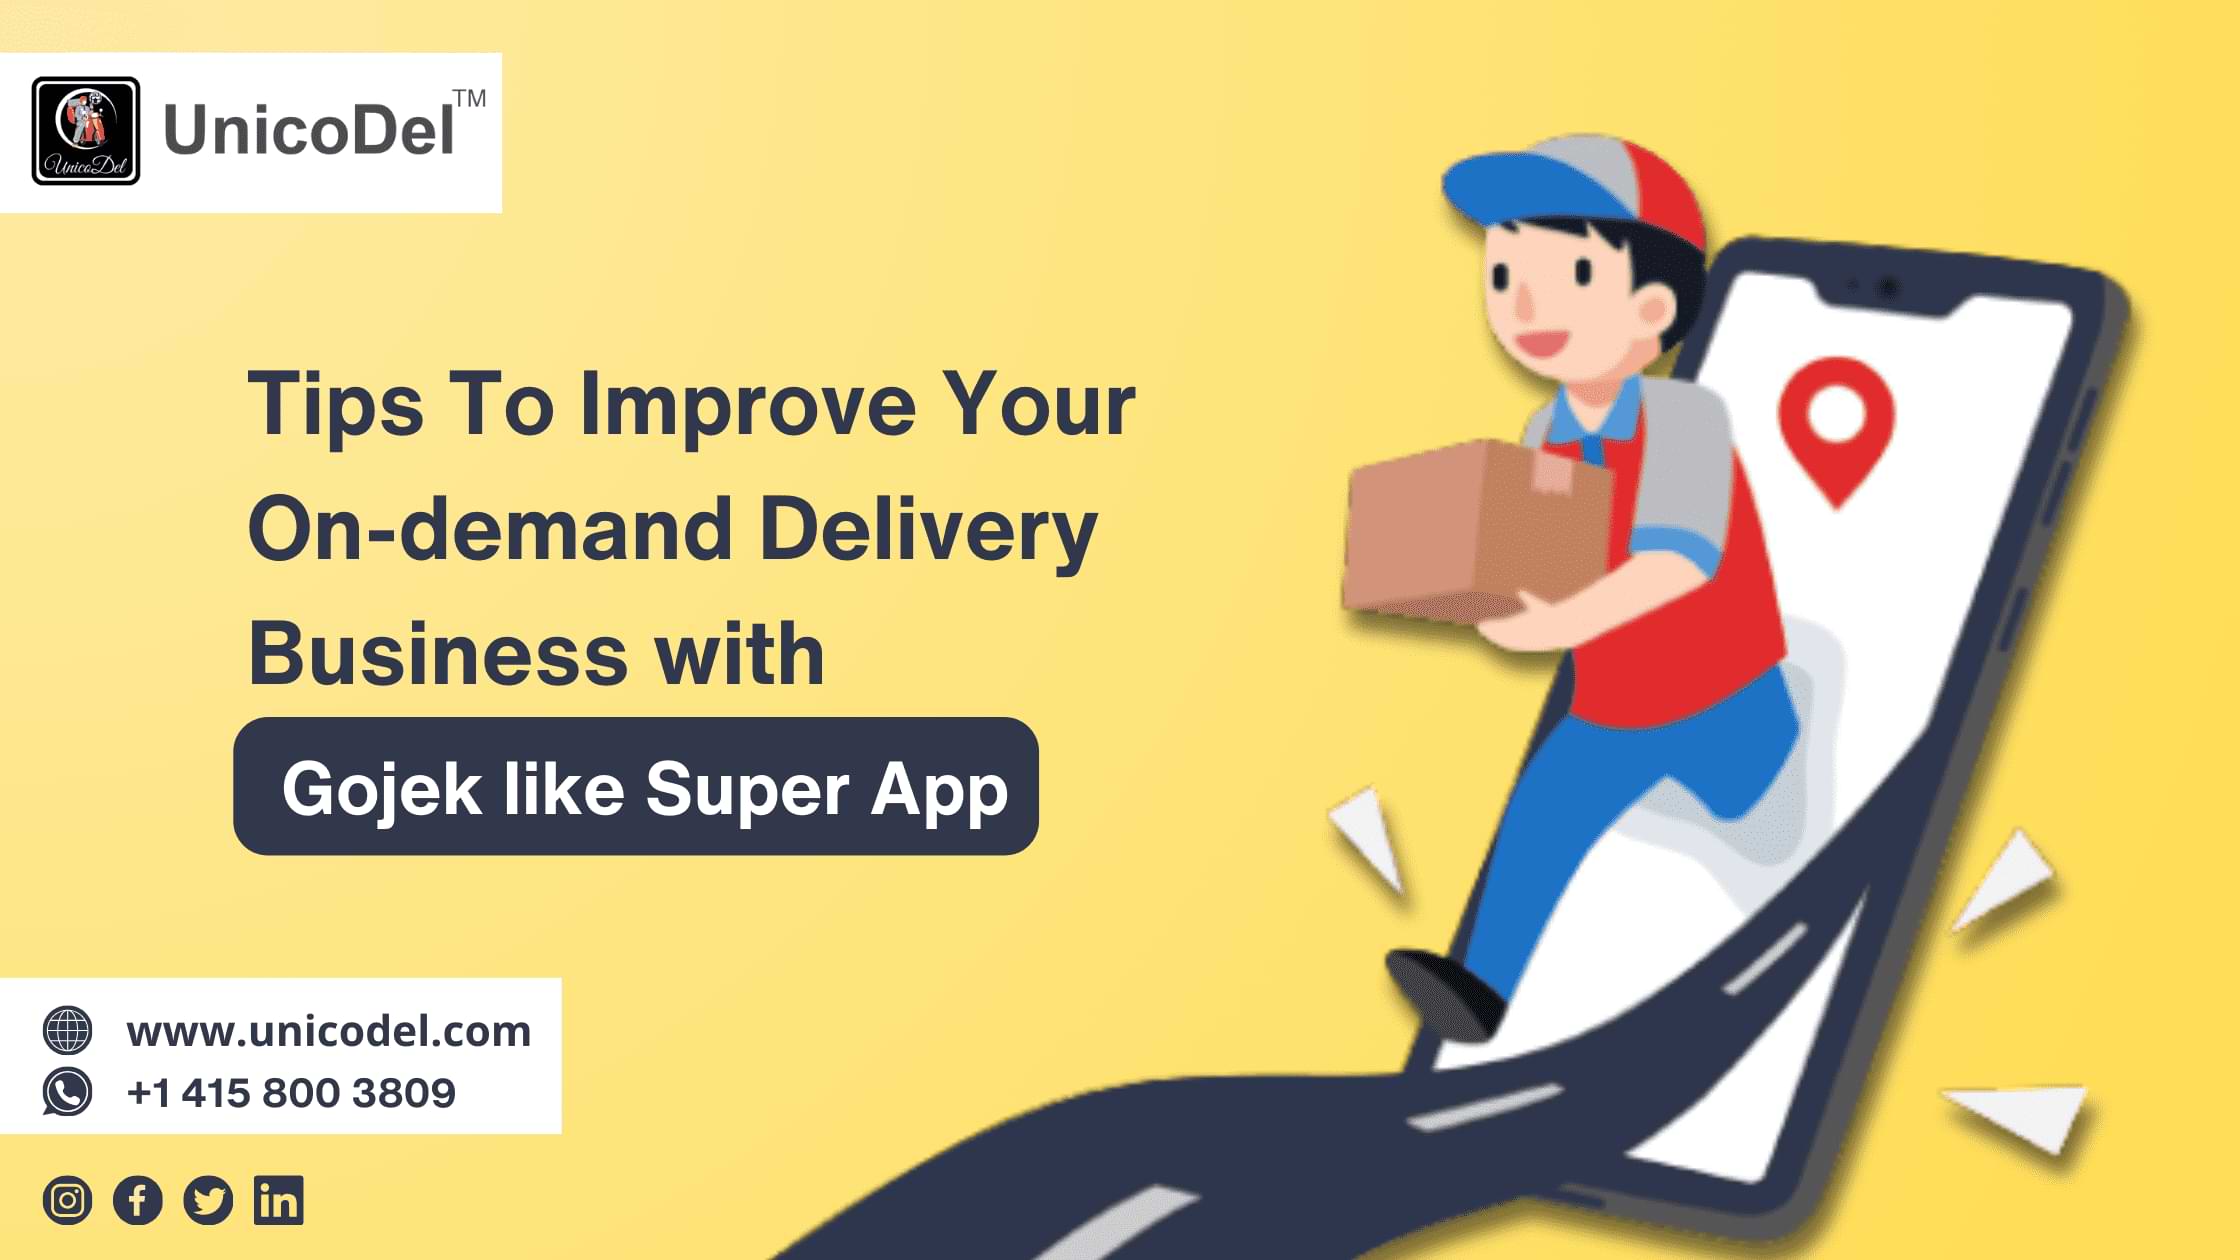 Tips to Improve Your On-demand Delivery Business with Gojek like Super App